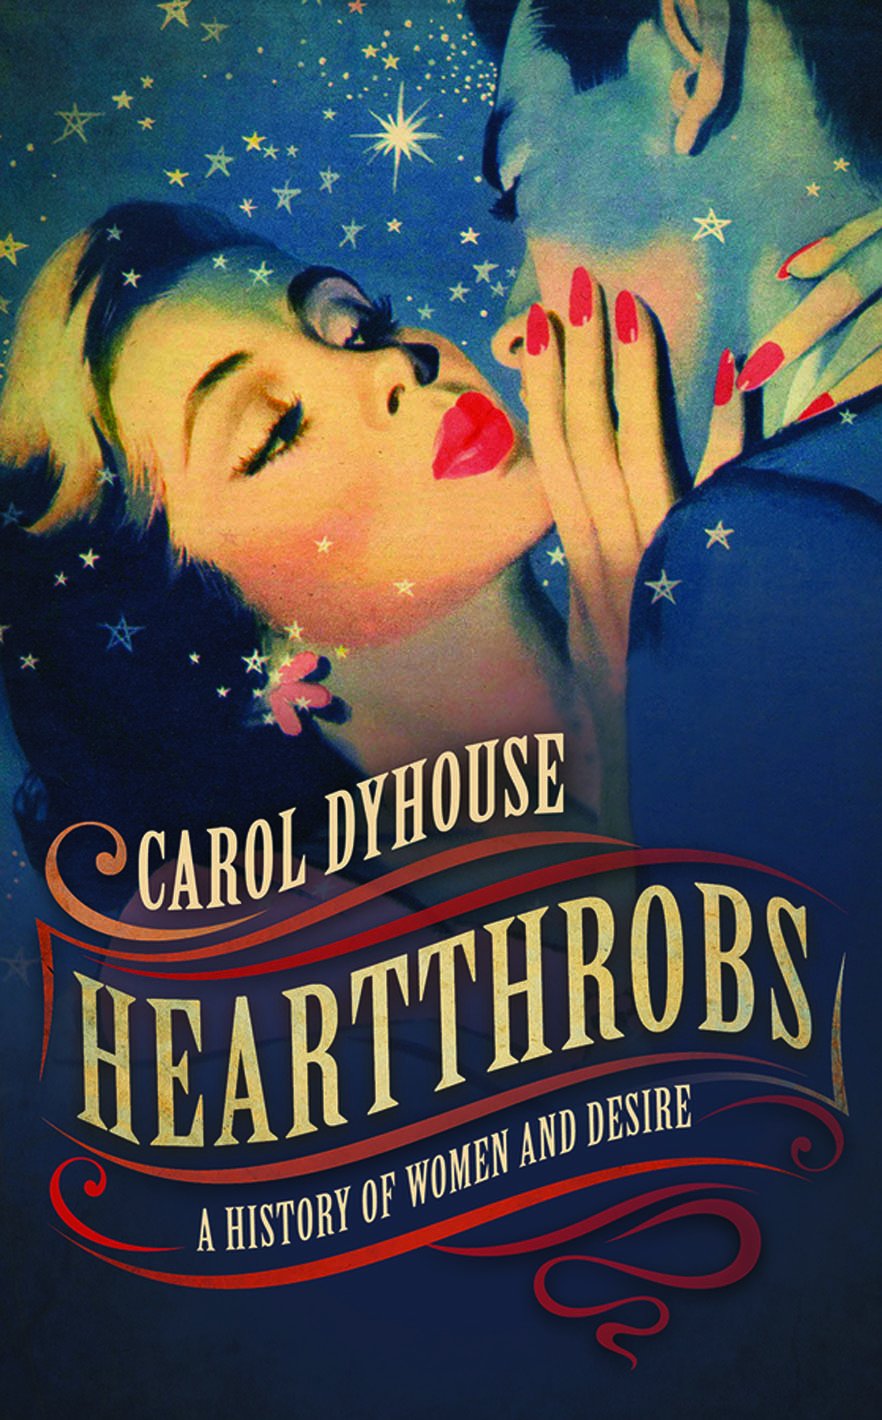 Heartthrobs: A History of Women and Desire by Carol Dyhouse.